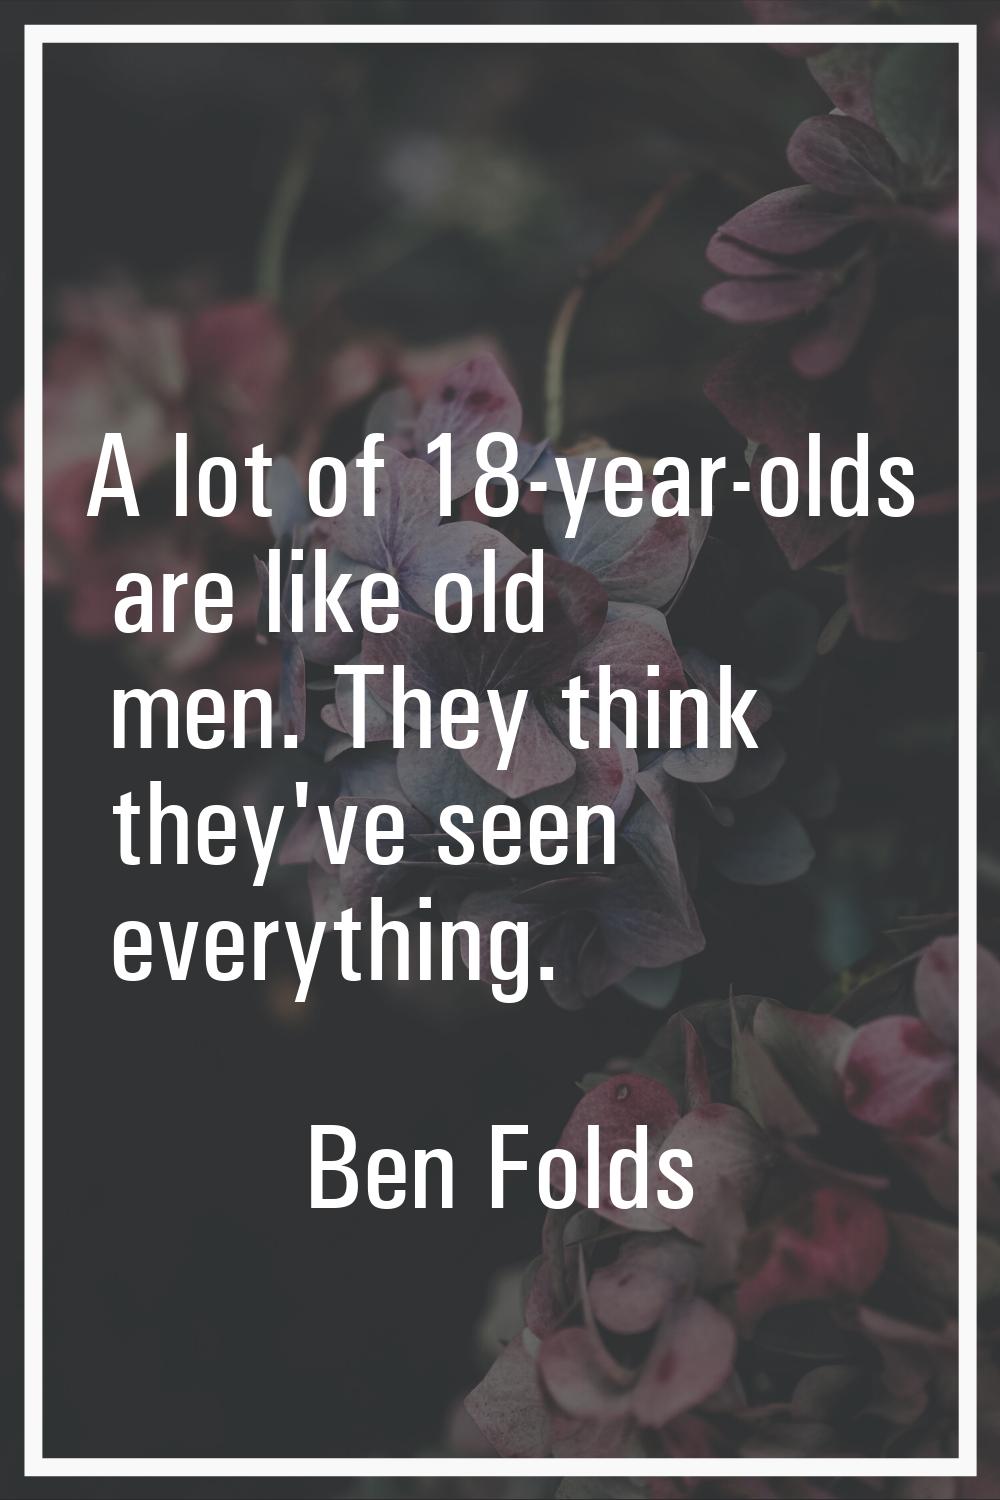 A lot of 18-year-olds are like old men. They think they've seen everything.